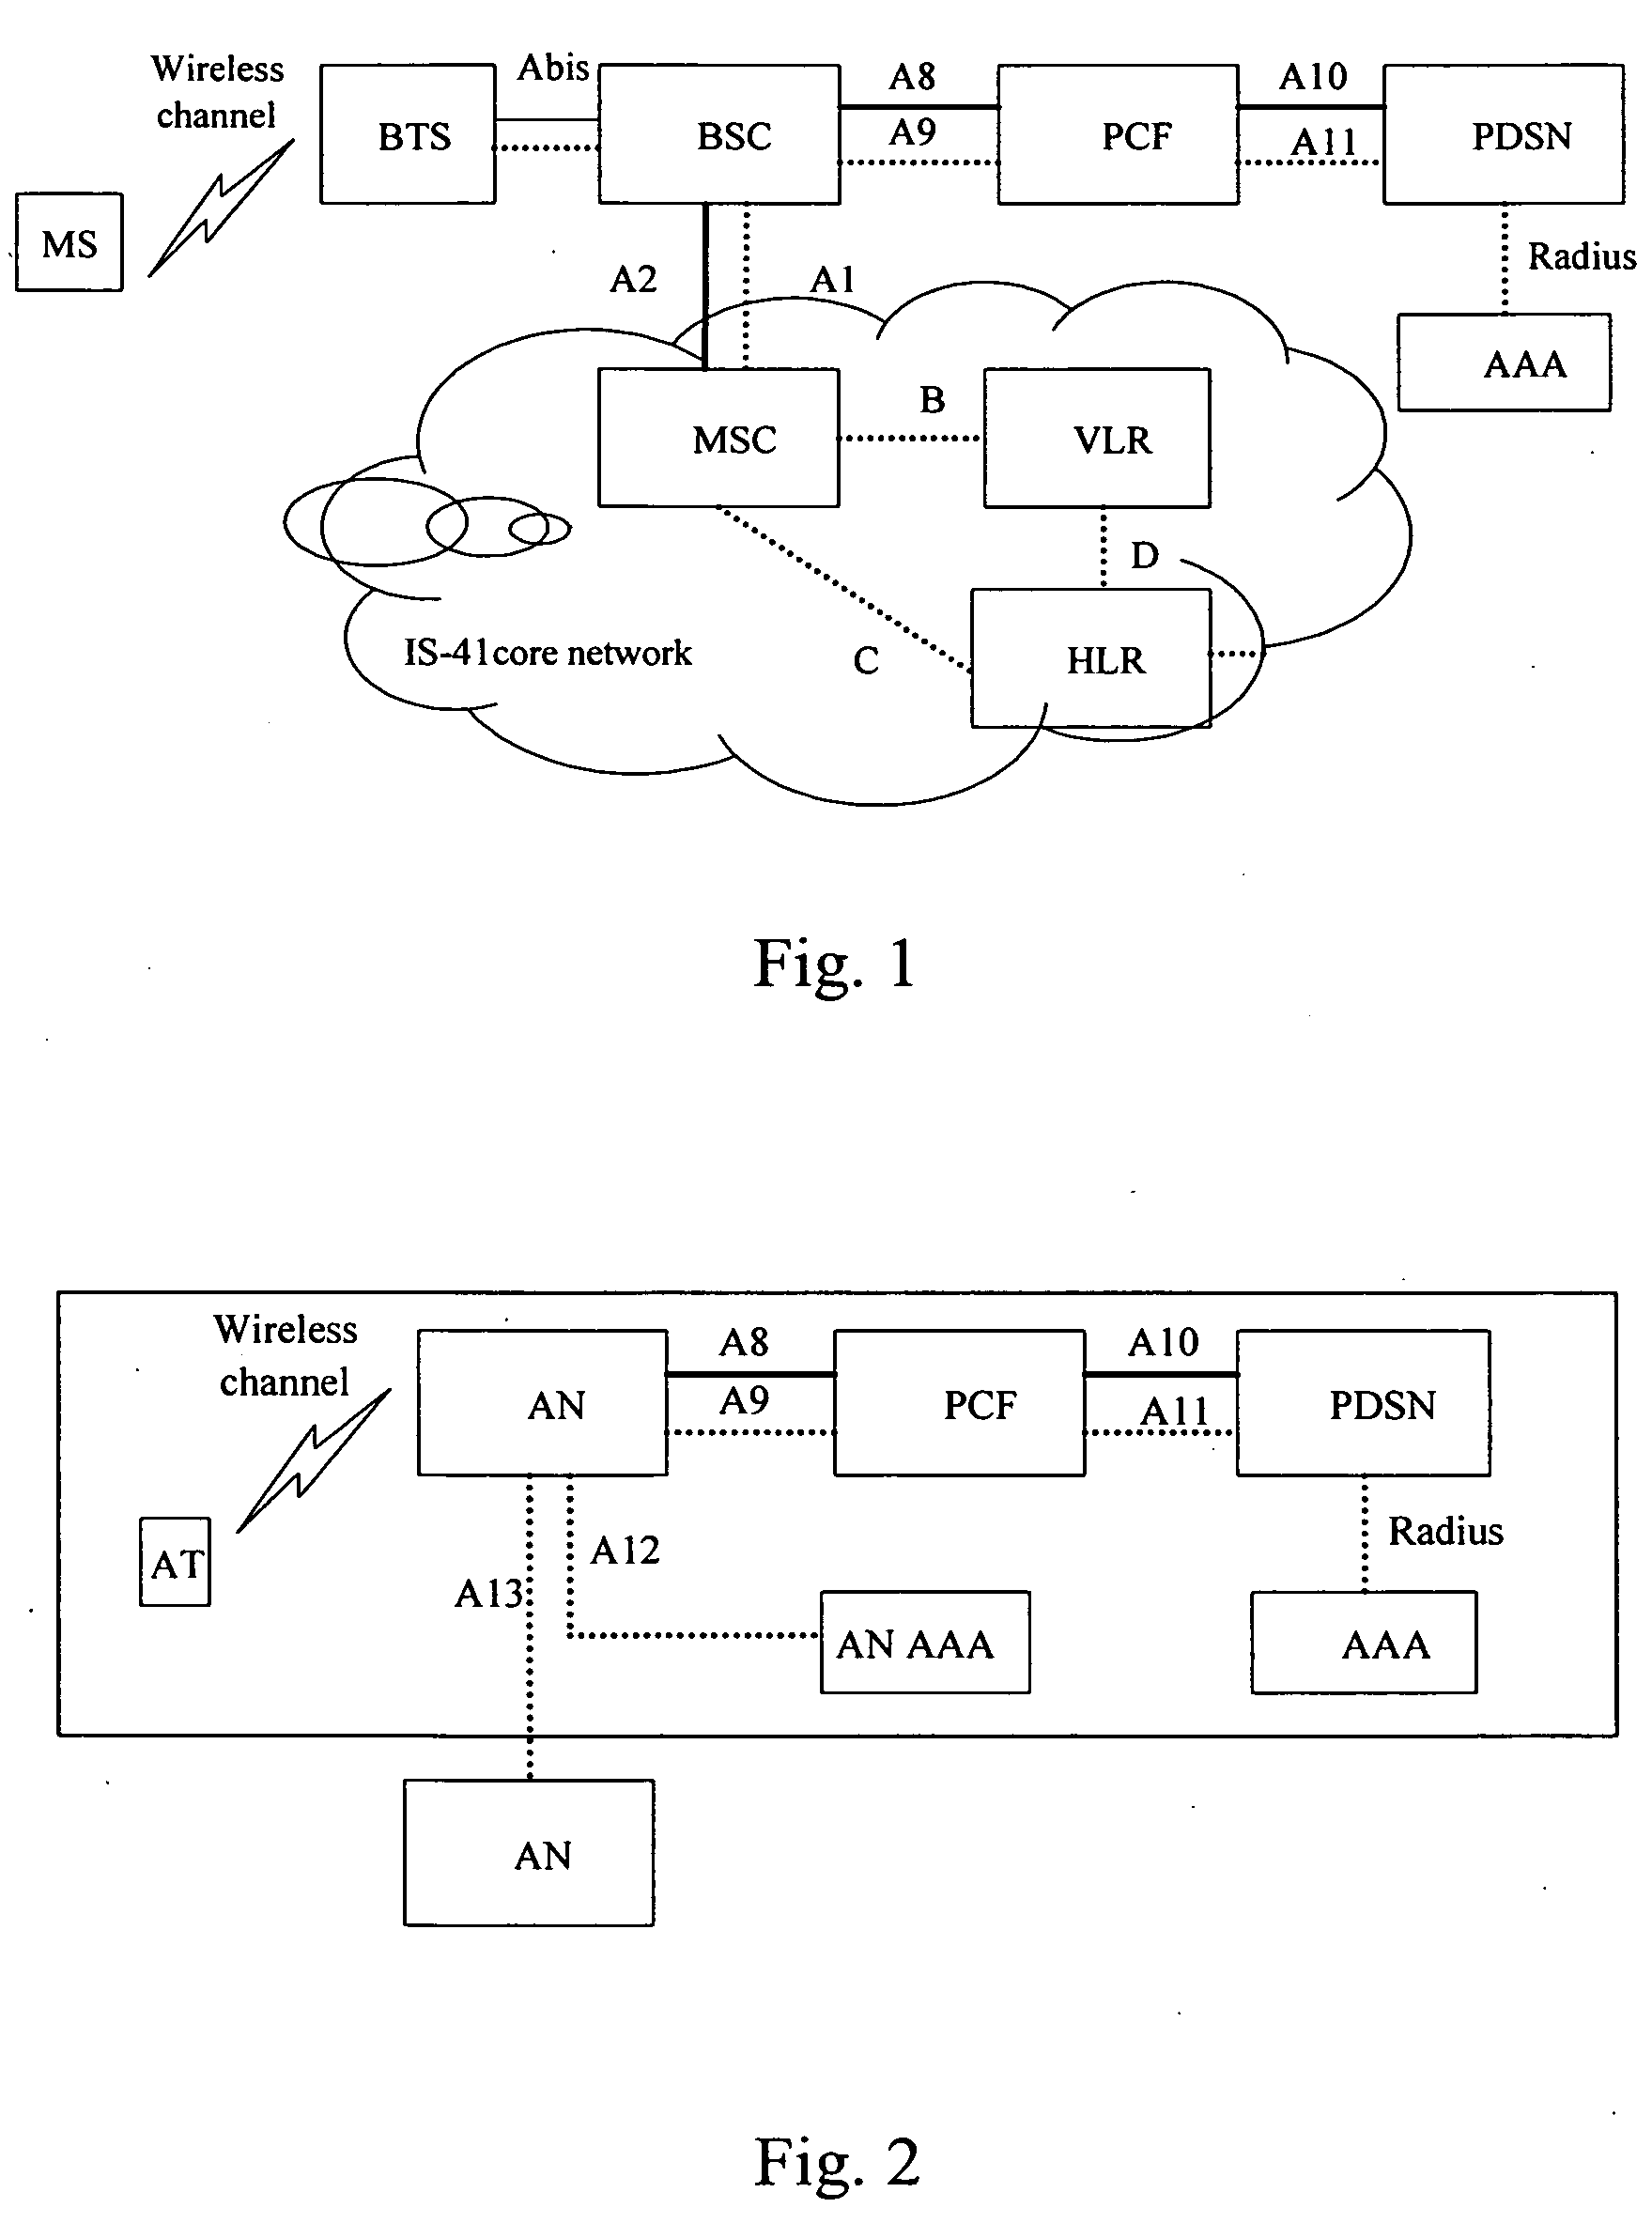 Method of implementing authentication of high-rate packet data services